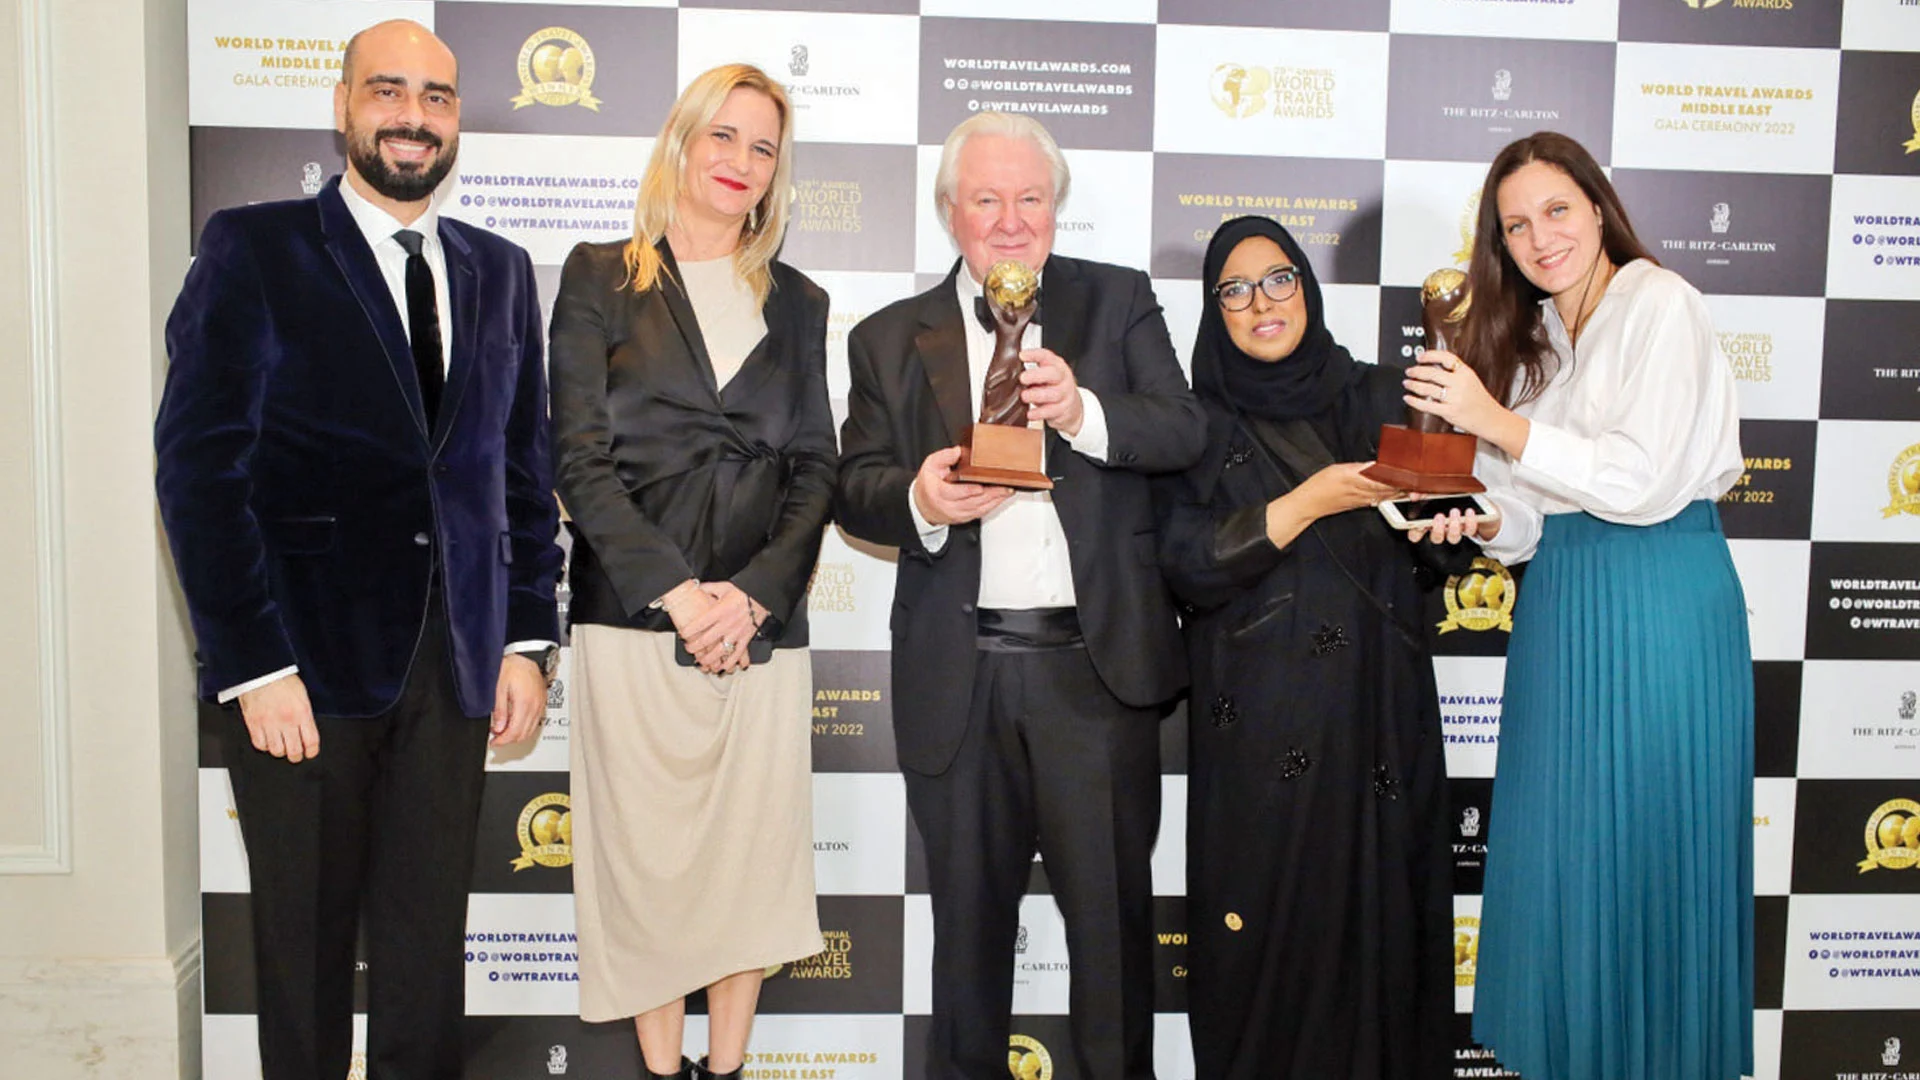 Qatar Tourism Wins 13 Global Awards for Best Website and Tourism Authority